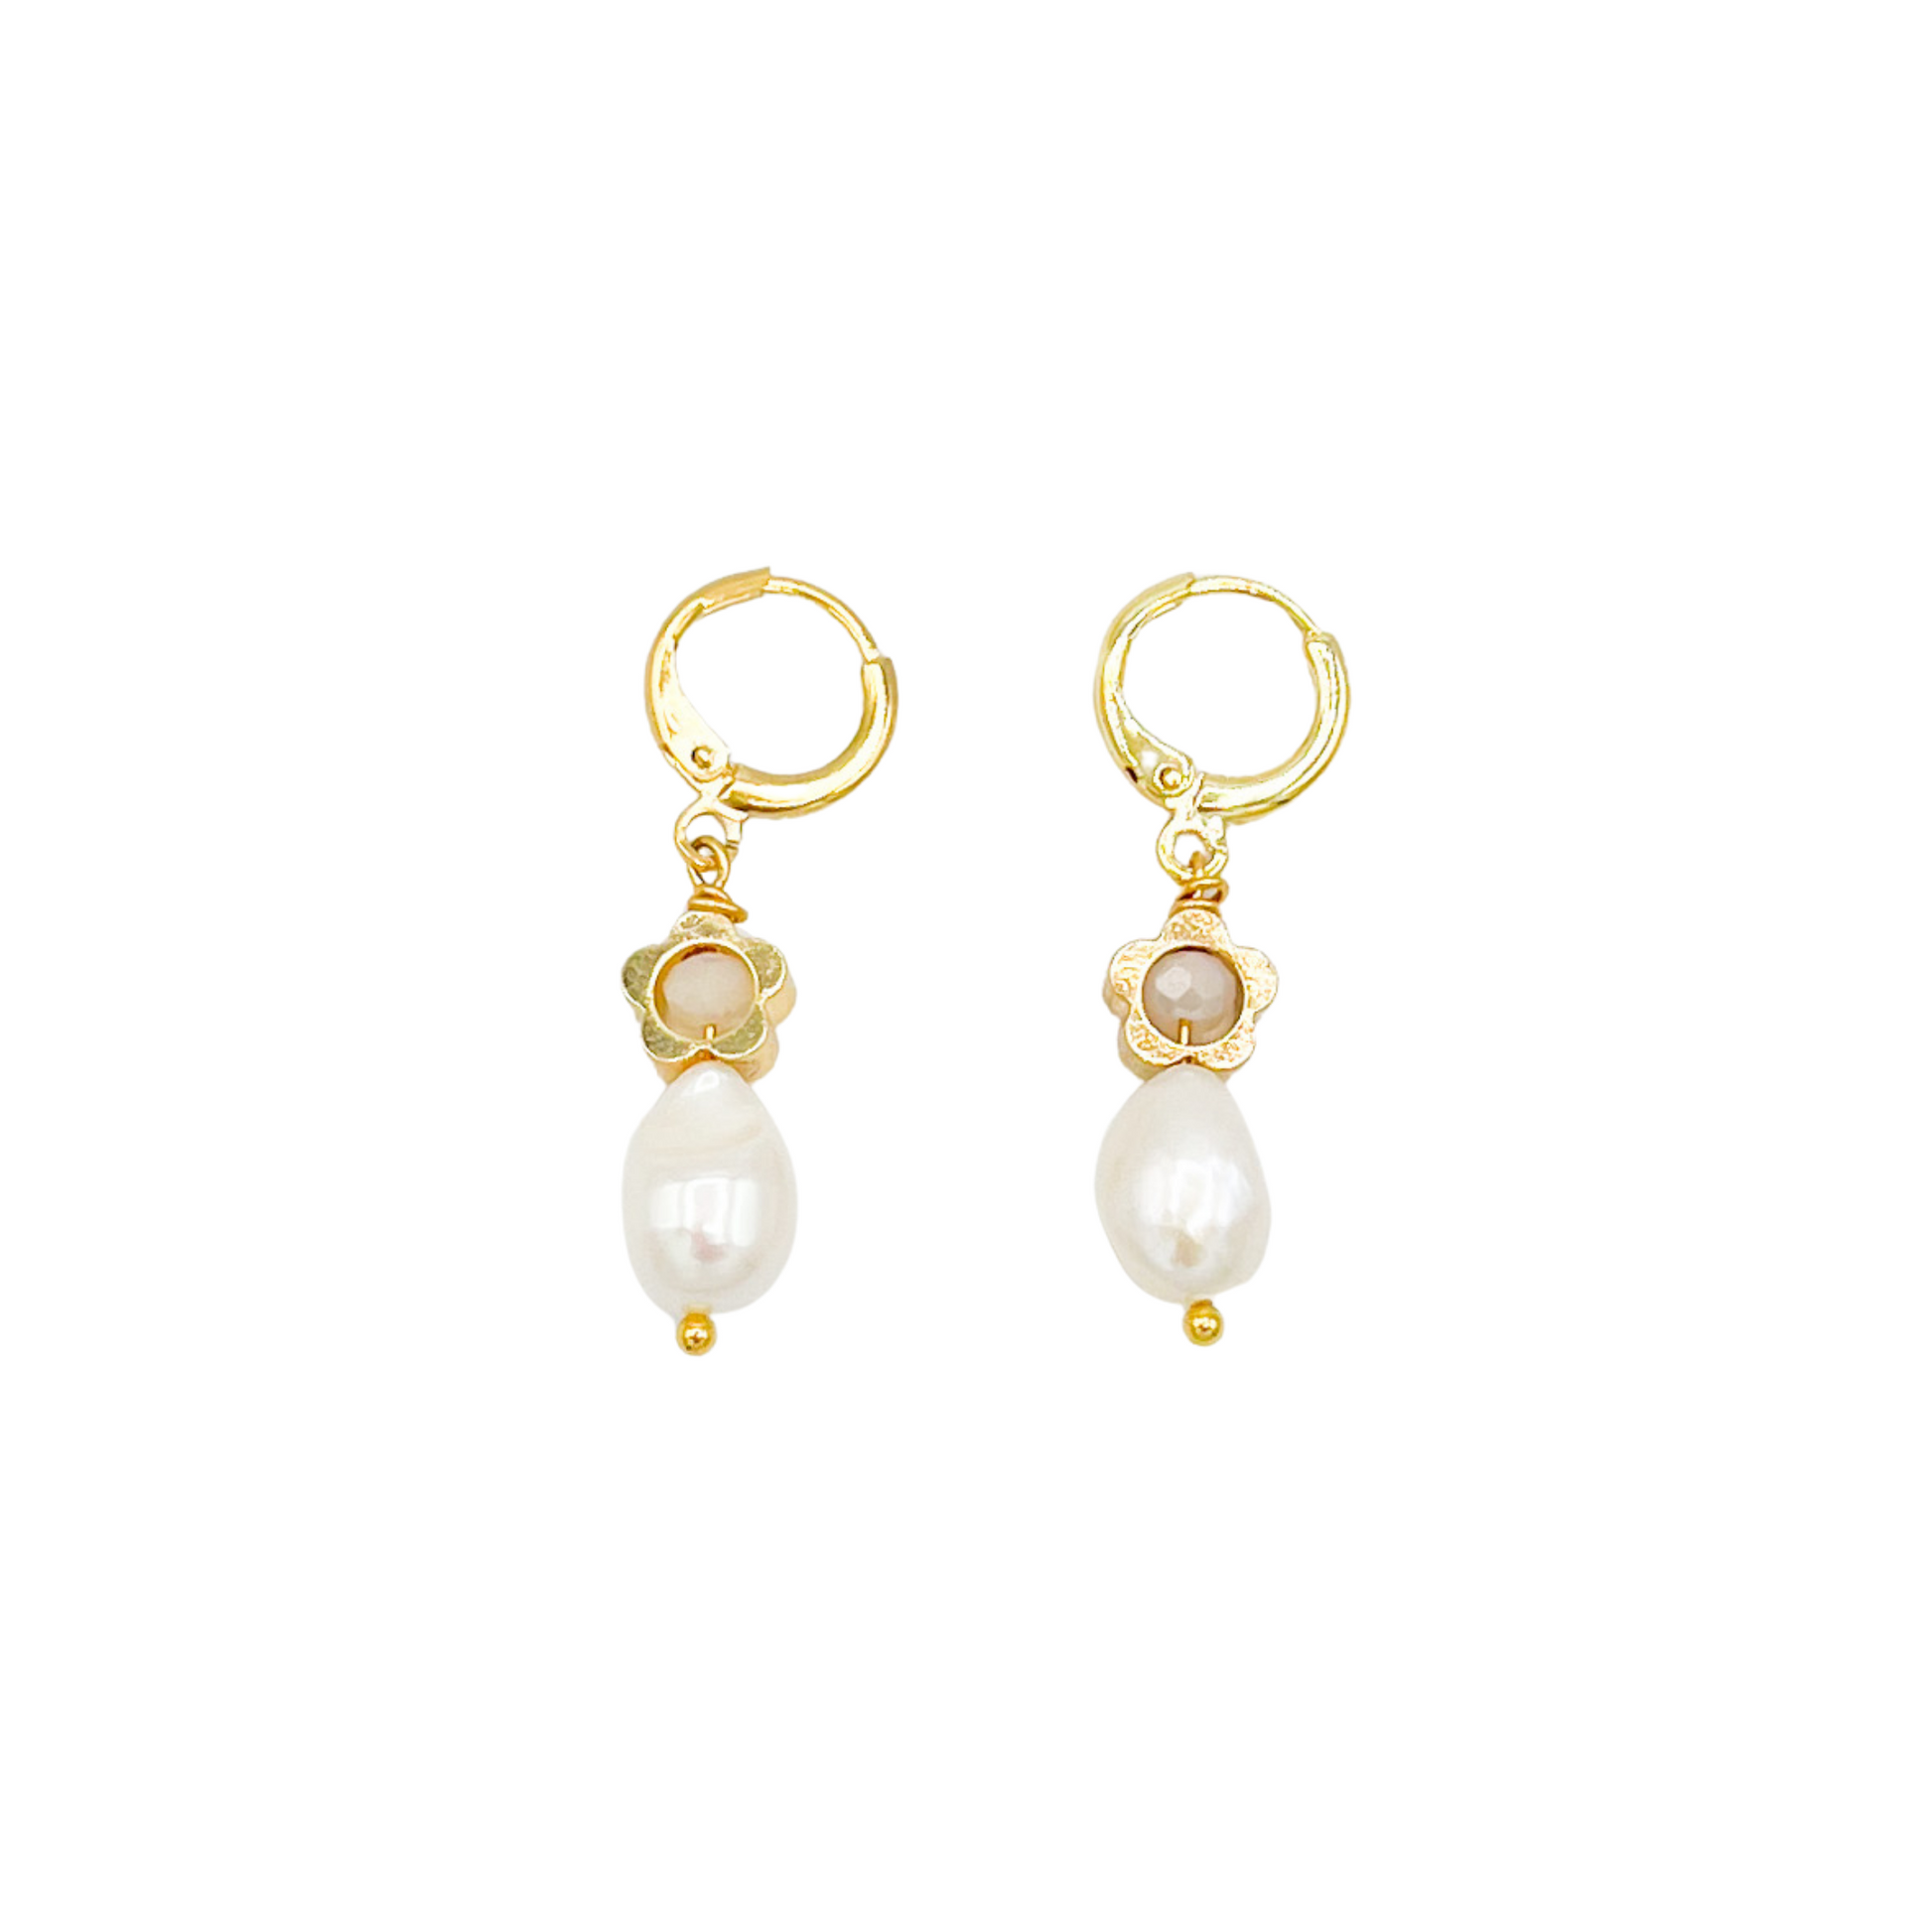 Roop jewelry bloom earrings with freshwater pearl. Roop collection. Jewelry boutique in Oakland, Ca.